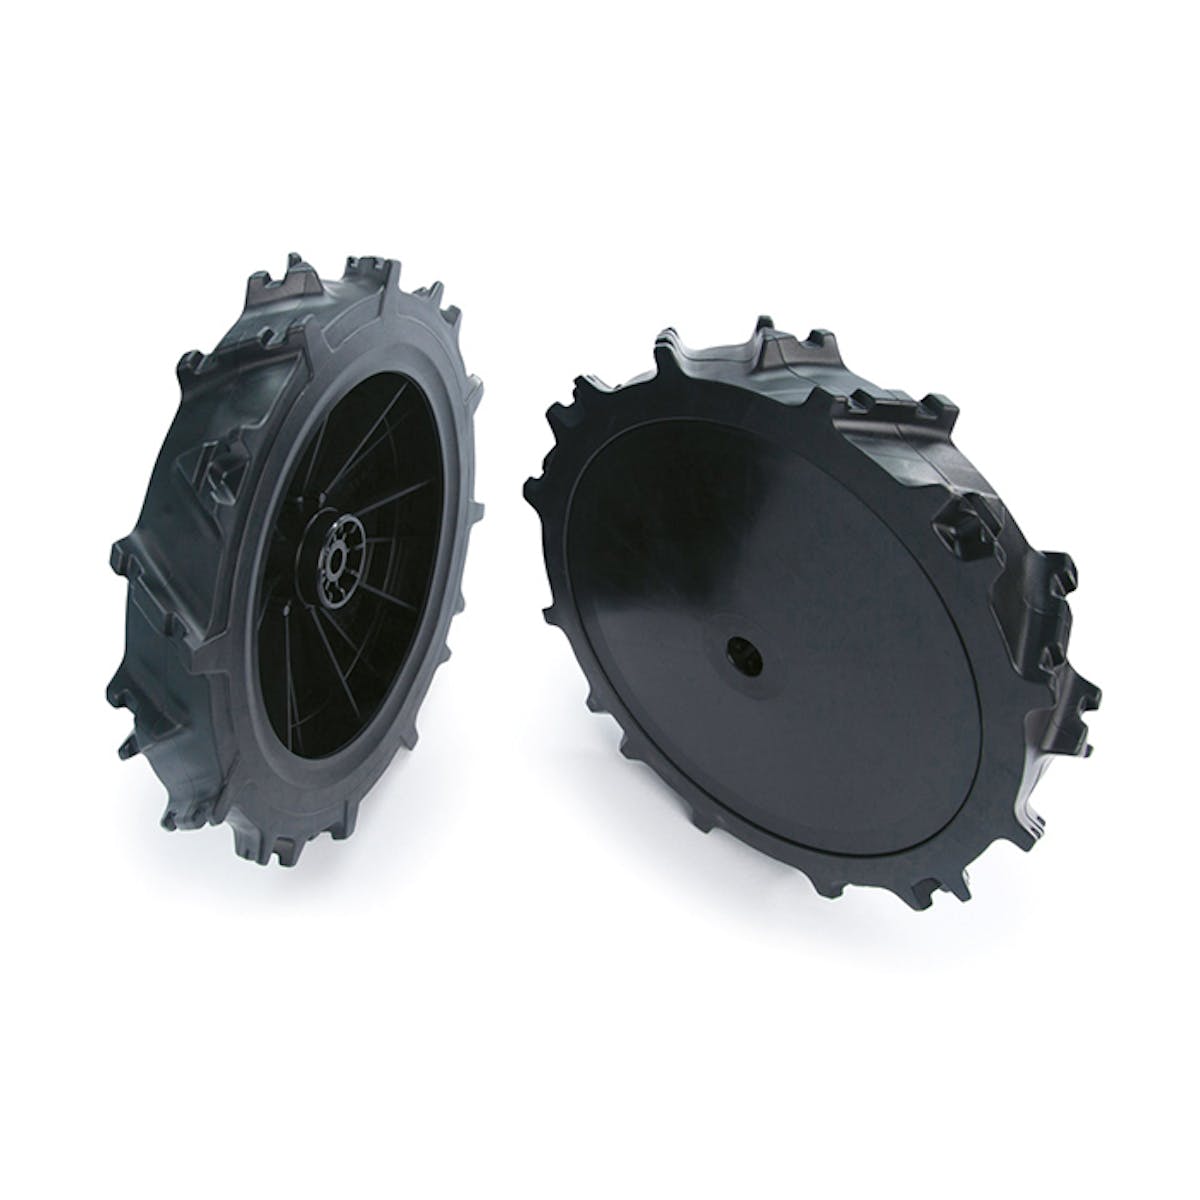 iMOW® High Traction Wheels